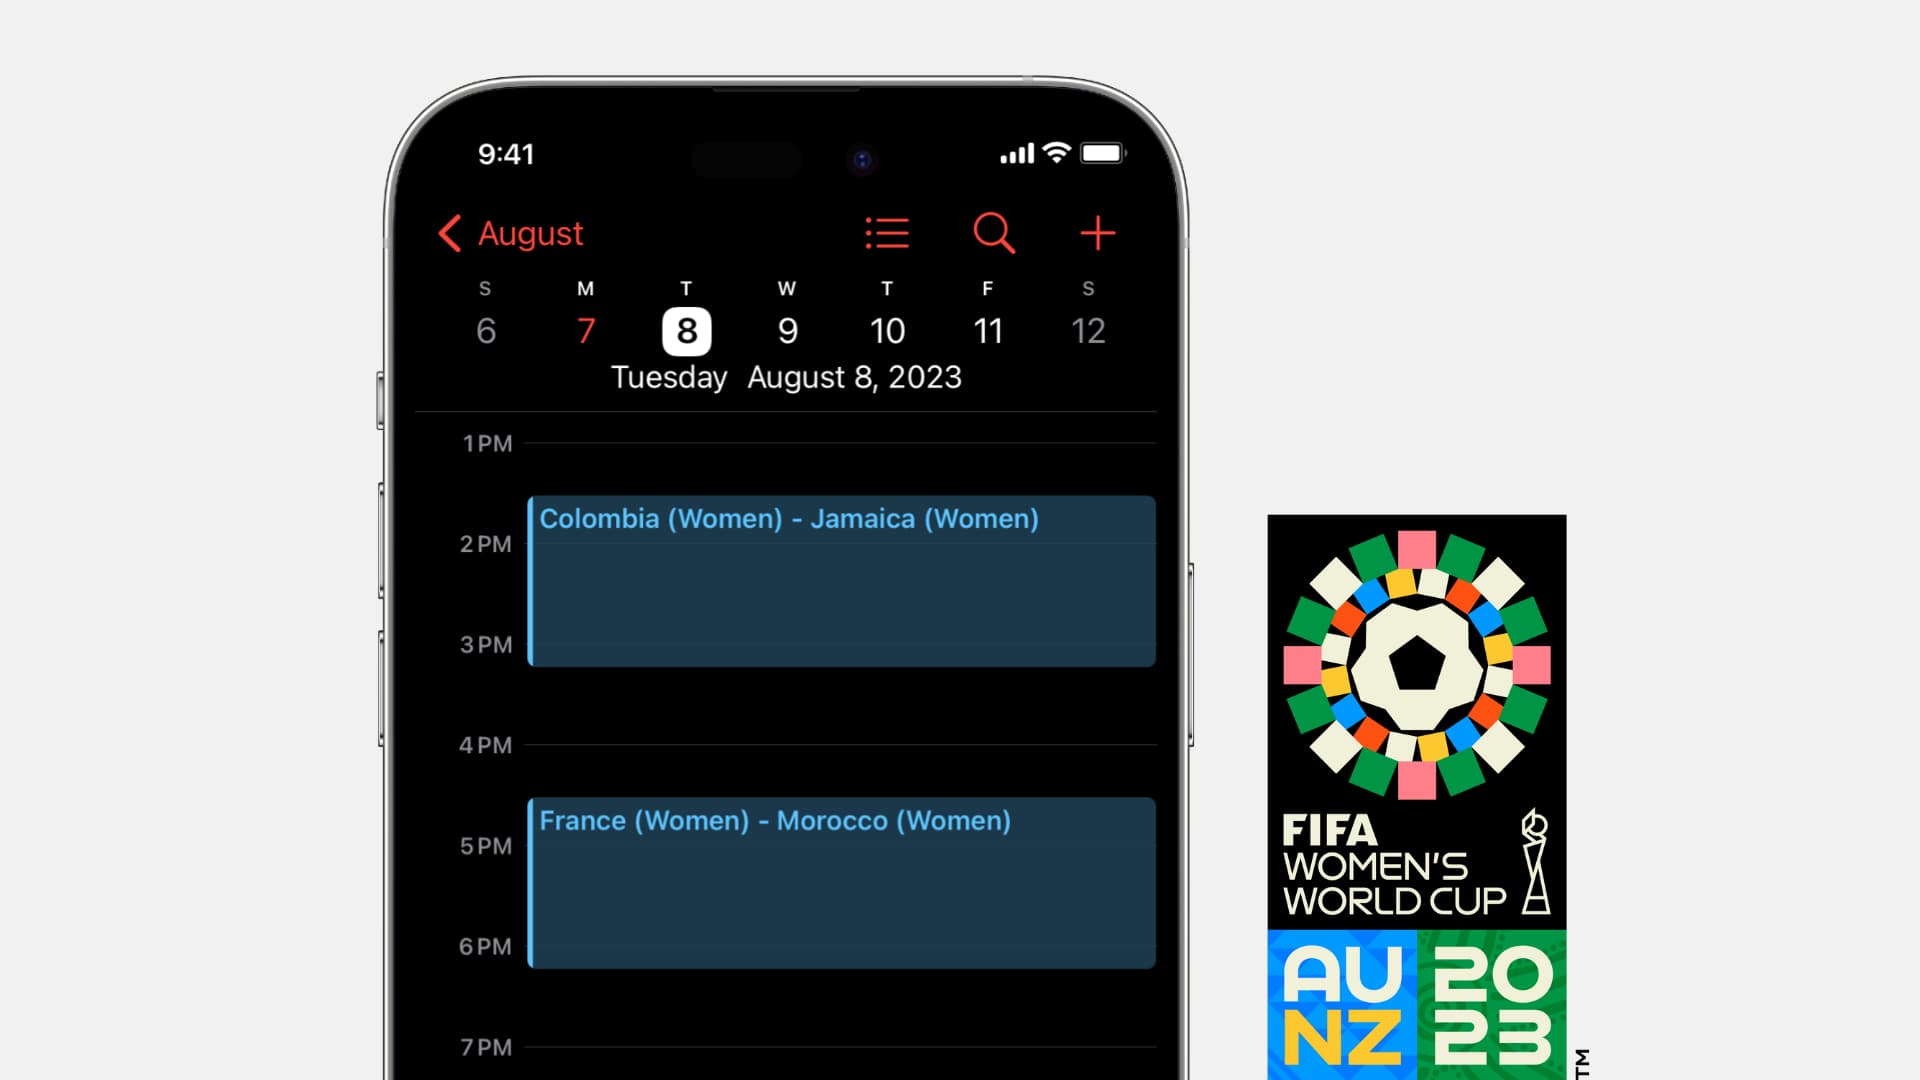 FIFA 2023 Women World Cup schedule added to iPhone Calendar